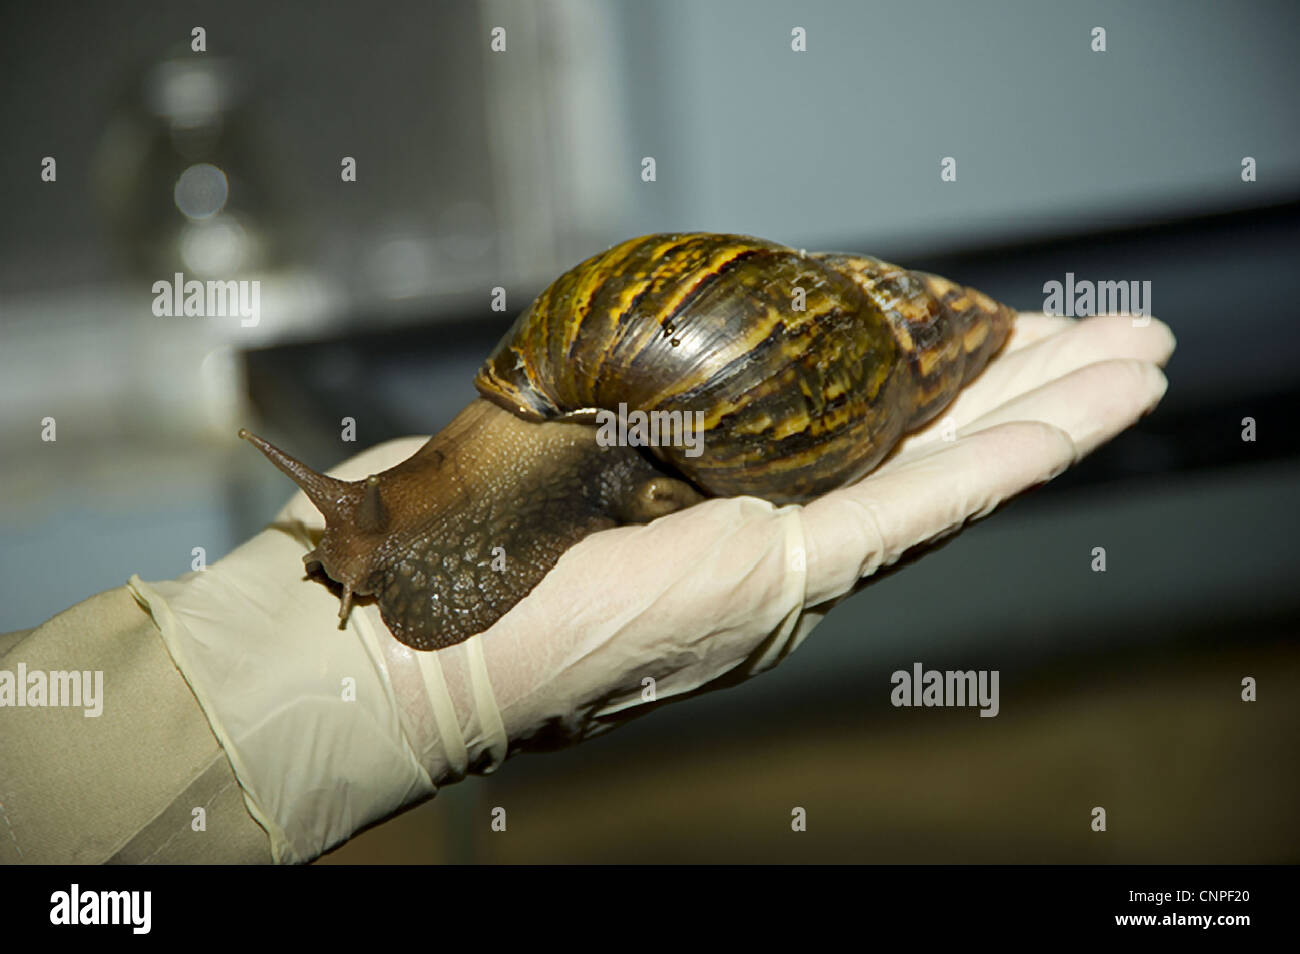 Giant African snails can reach up to 8 inches in length and nearly 5 inches in diameter—about the size of an average adult fist—and can live up to nine years. In a typical year, mated adults lay about 1,200 eggs. The invasive snails have recently invaded South Florida and eradication efforts are und Stock Photo